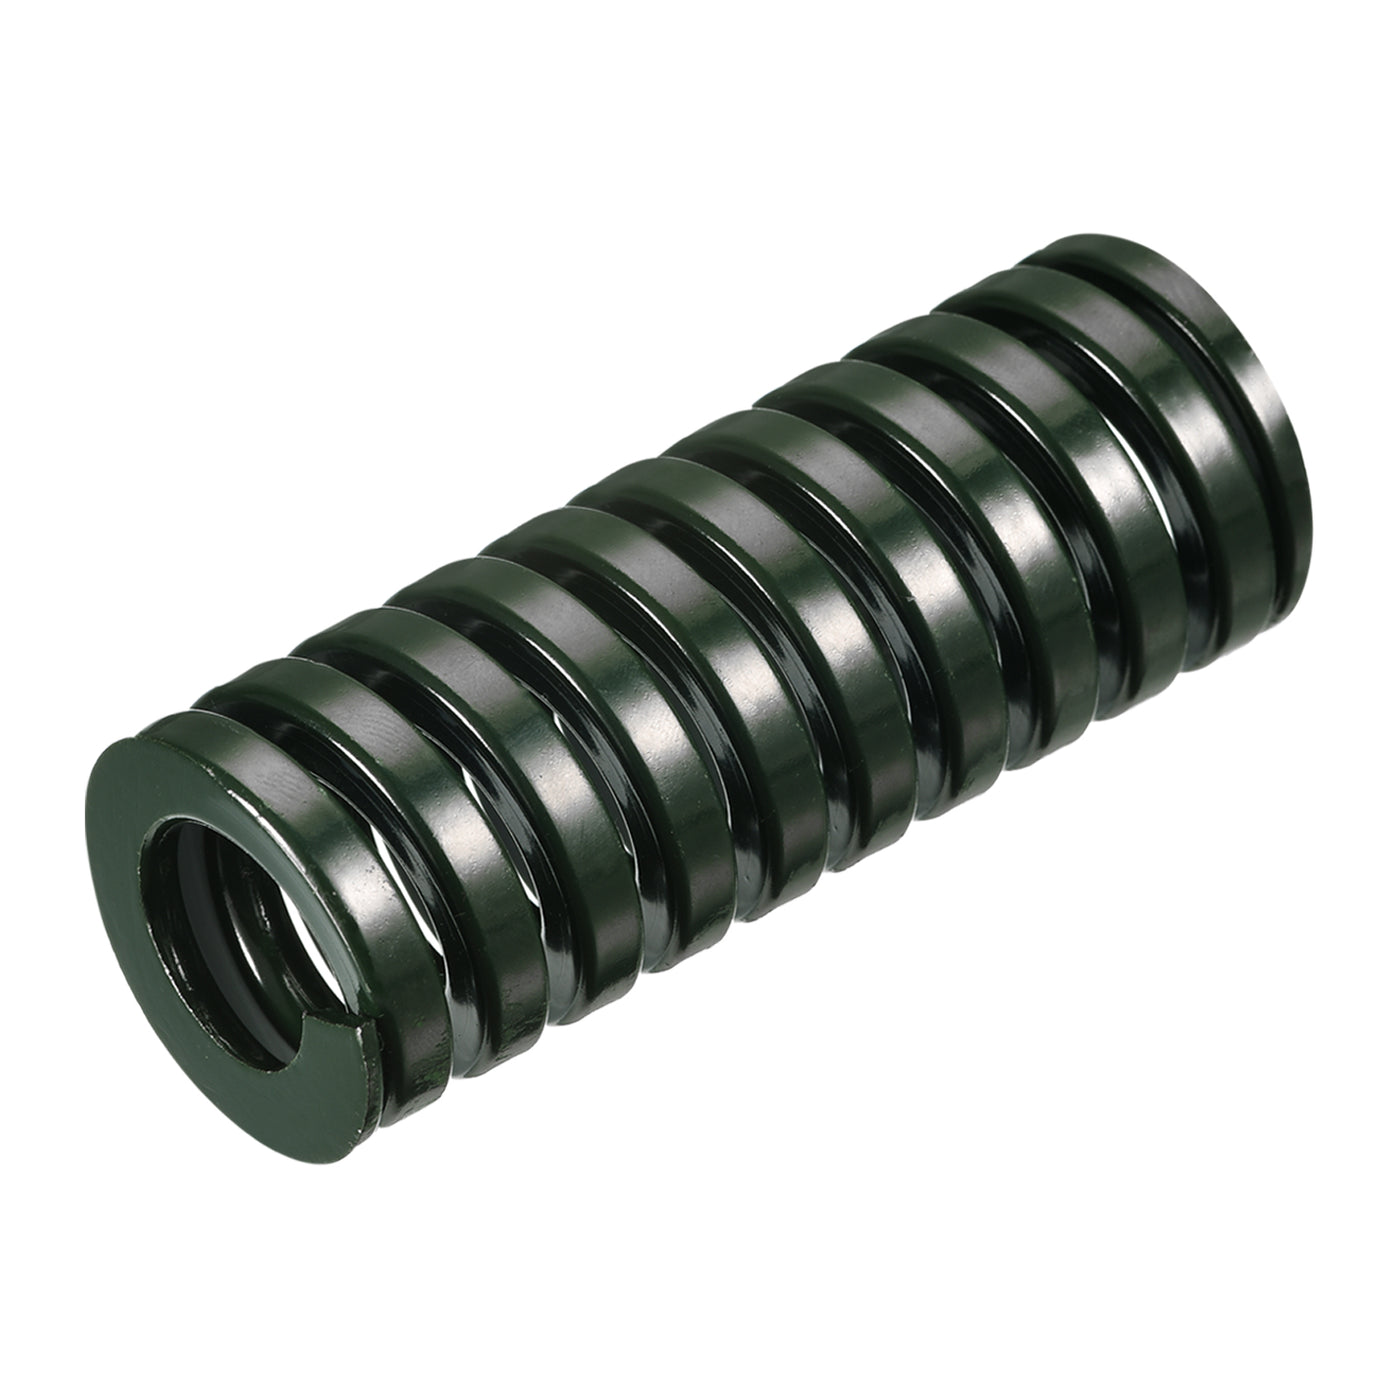 uxcell Uxcell 3D Printer Die Spring, 1pcs 30mm OD 80mm Long Spiral Stamping Compression Green